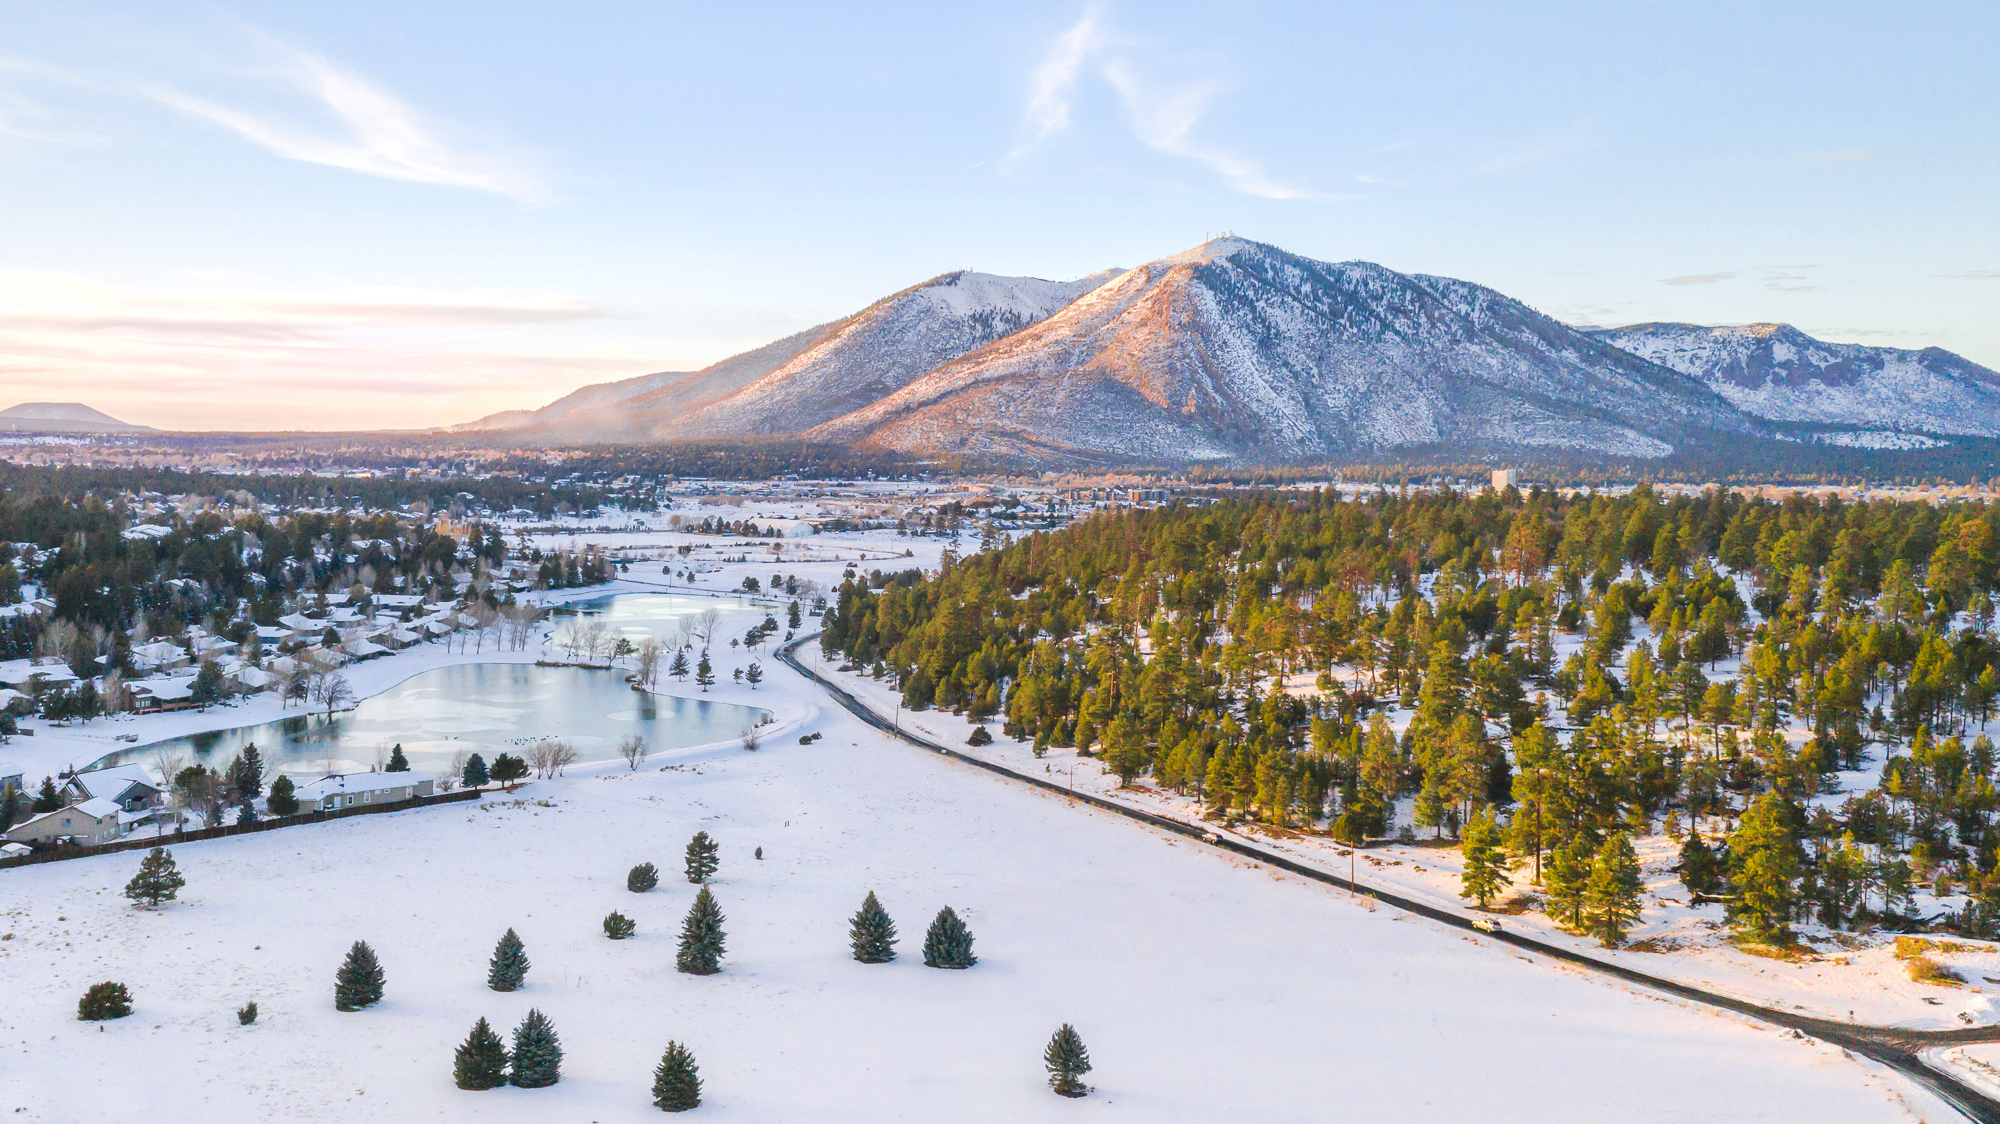 Winter in Northern Arizona. Aerial image of a snow-blanked Mount Elden at sunset in Flagstaff, Arizona.